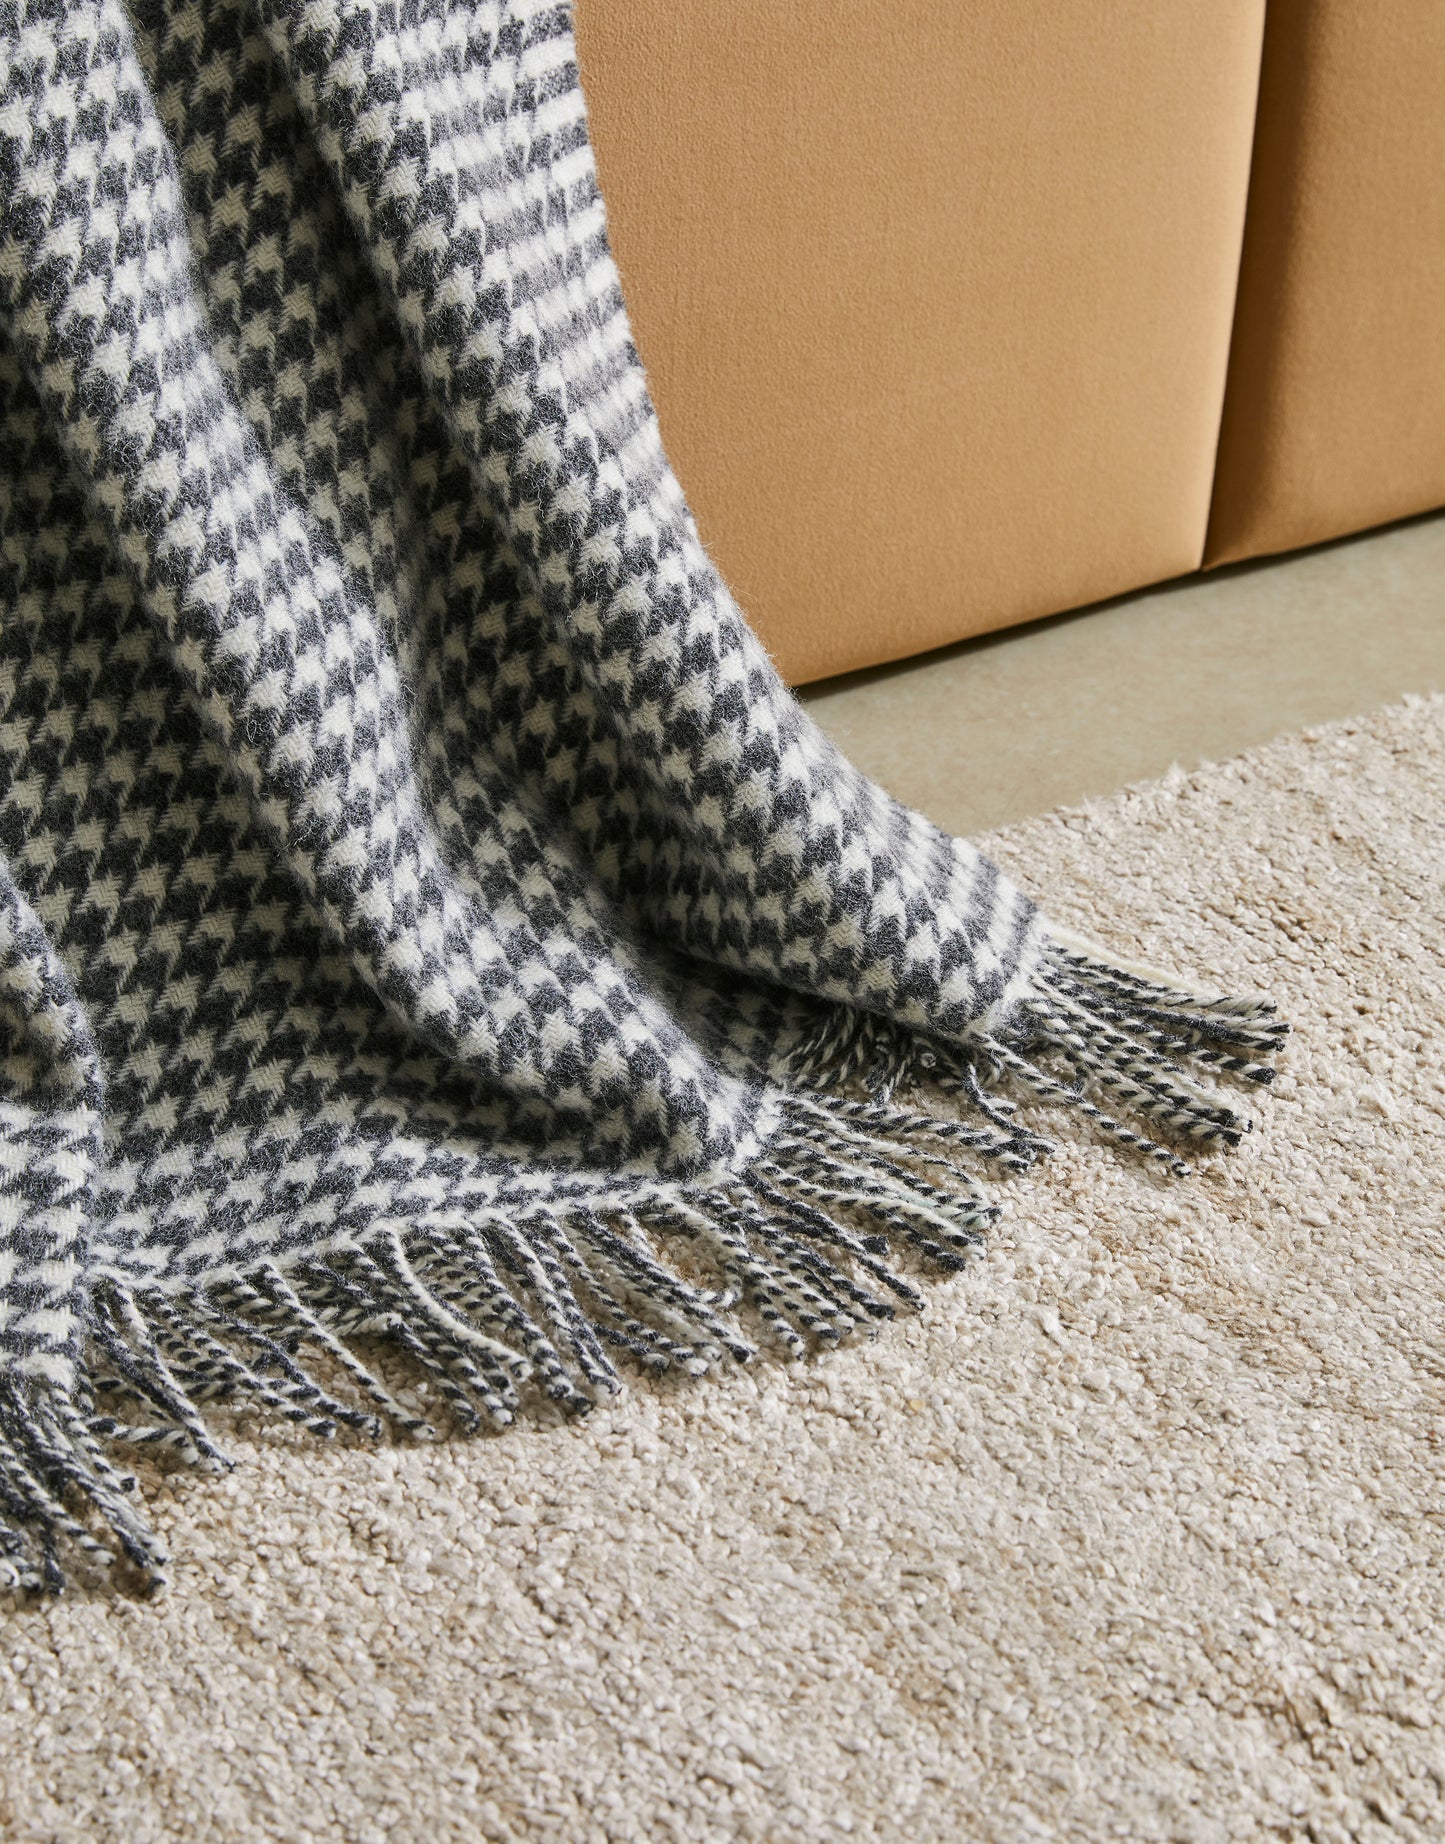 Huxter wool throw from Weave Home, houndstooth check in black and cream